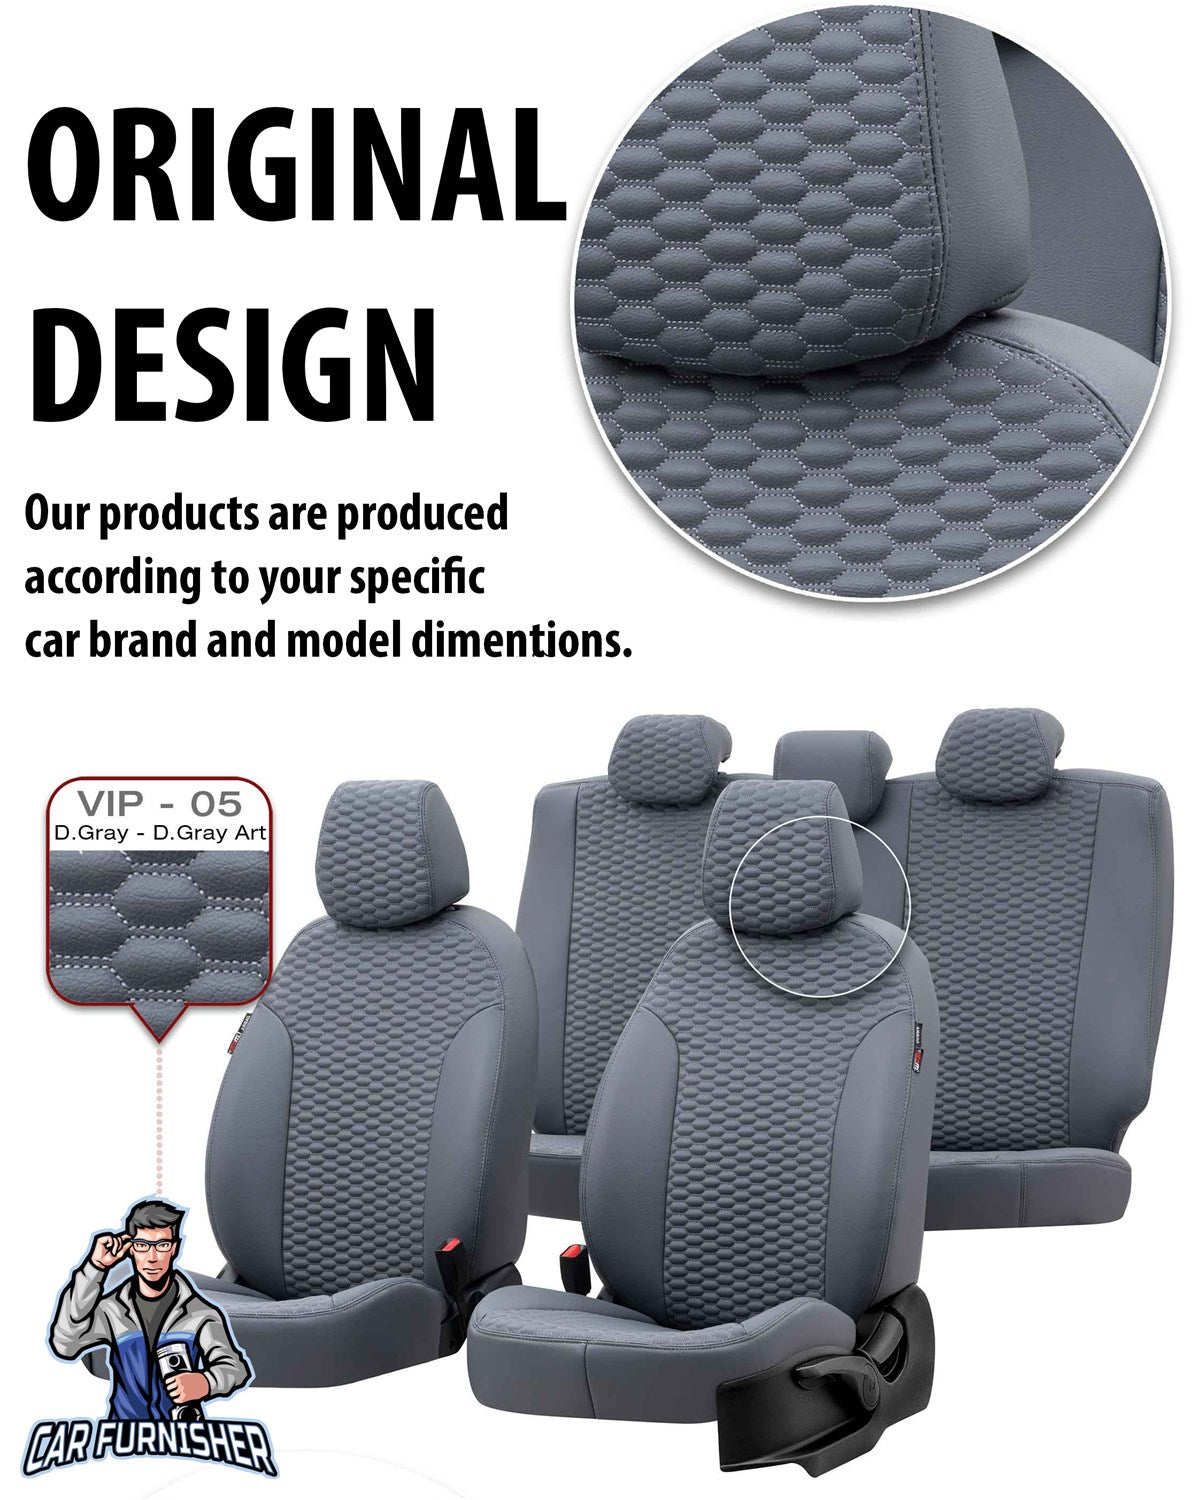 Fiat Marea Seat Covers Tokyo Leather Design Red Leather